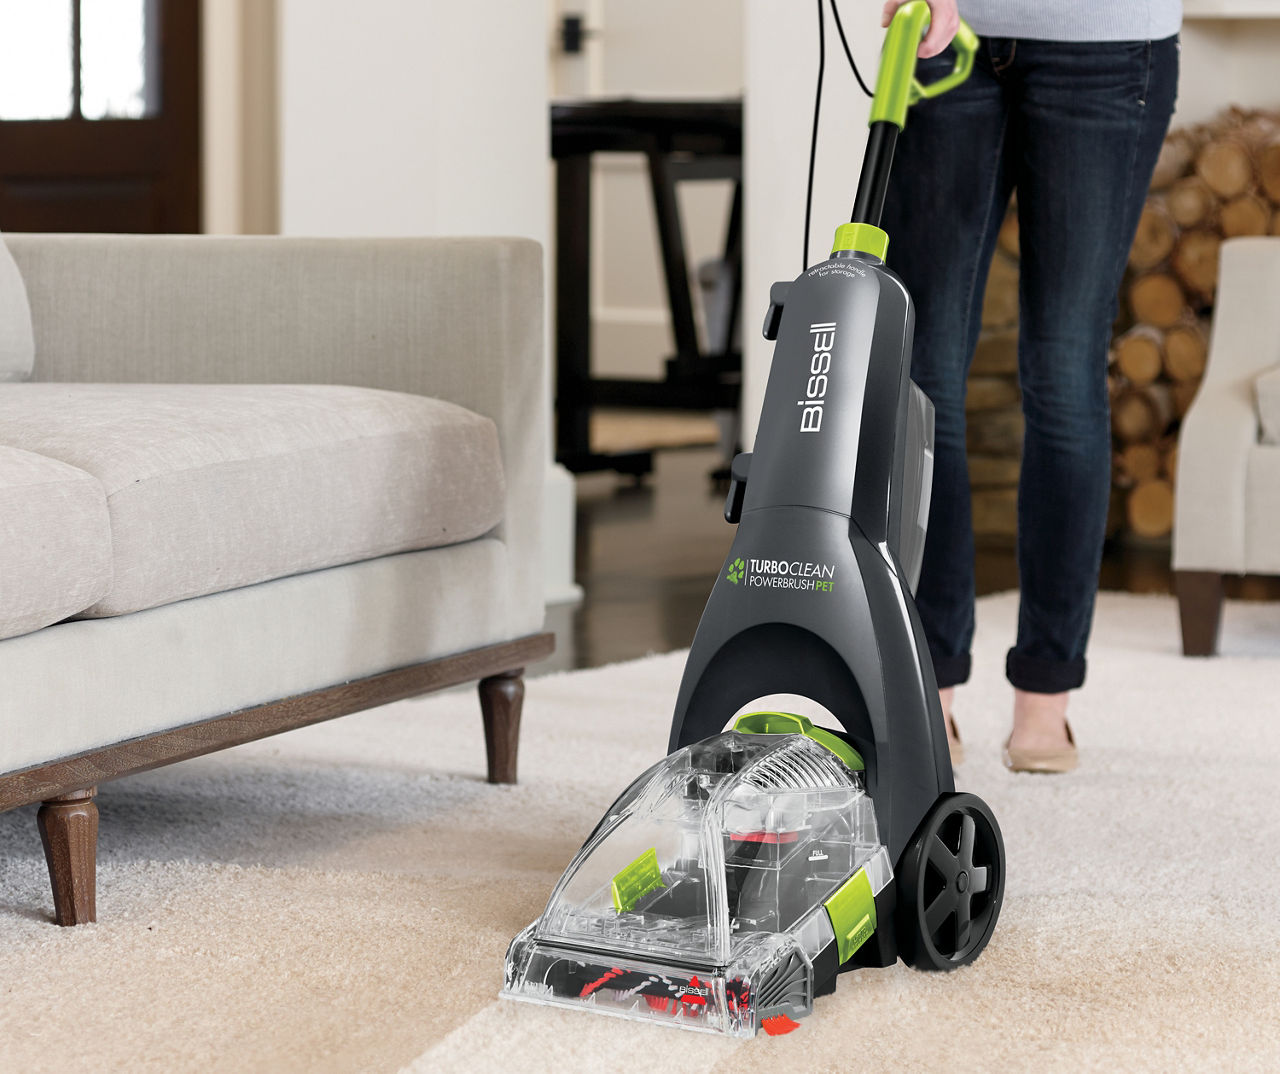 BISSELL Turboclean Powerbrush Pet Upright Carpet Cleaner Machine and Carpet  Shampooer, 2085